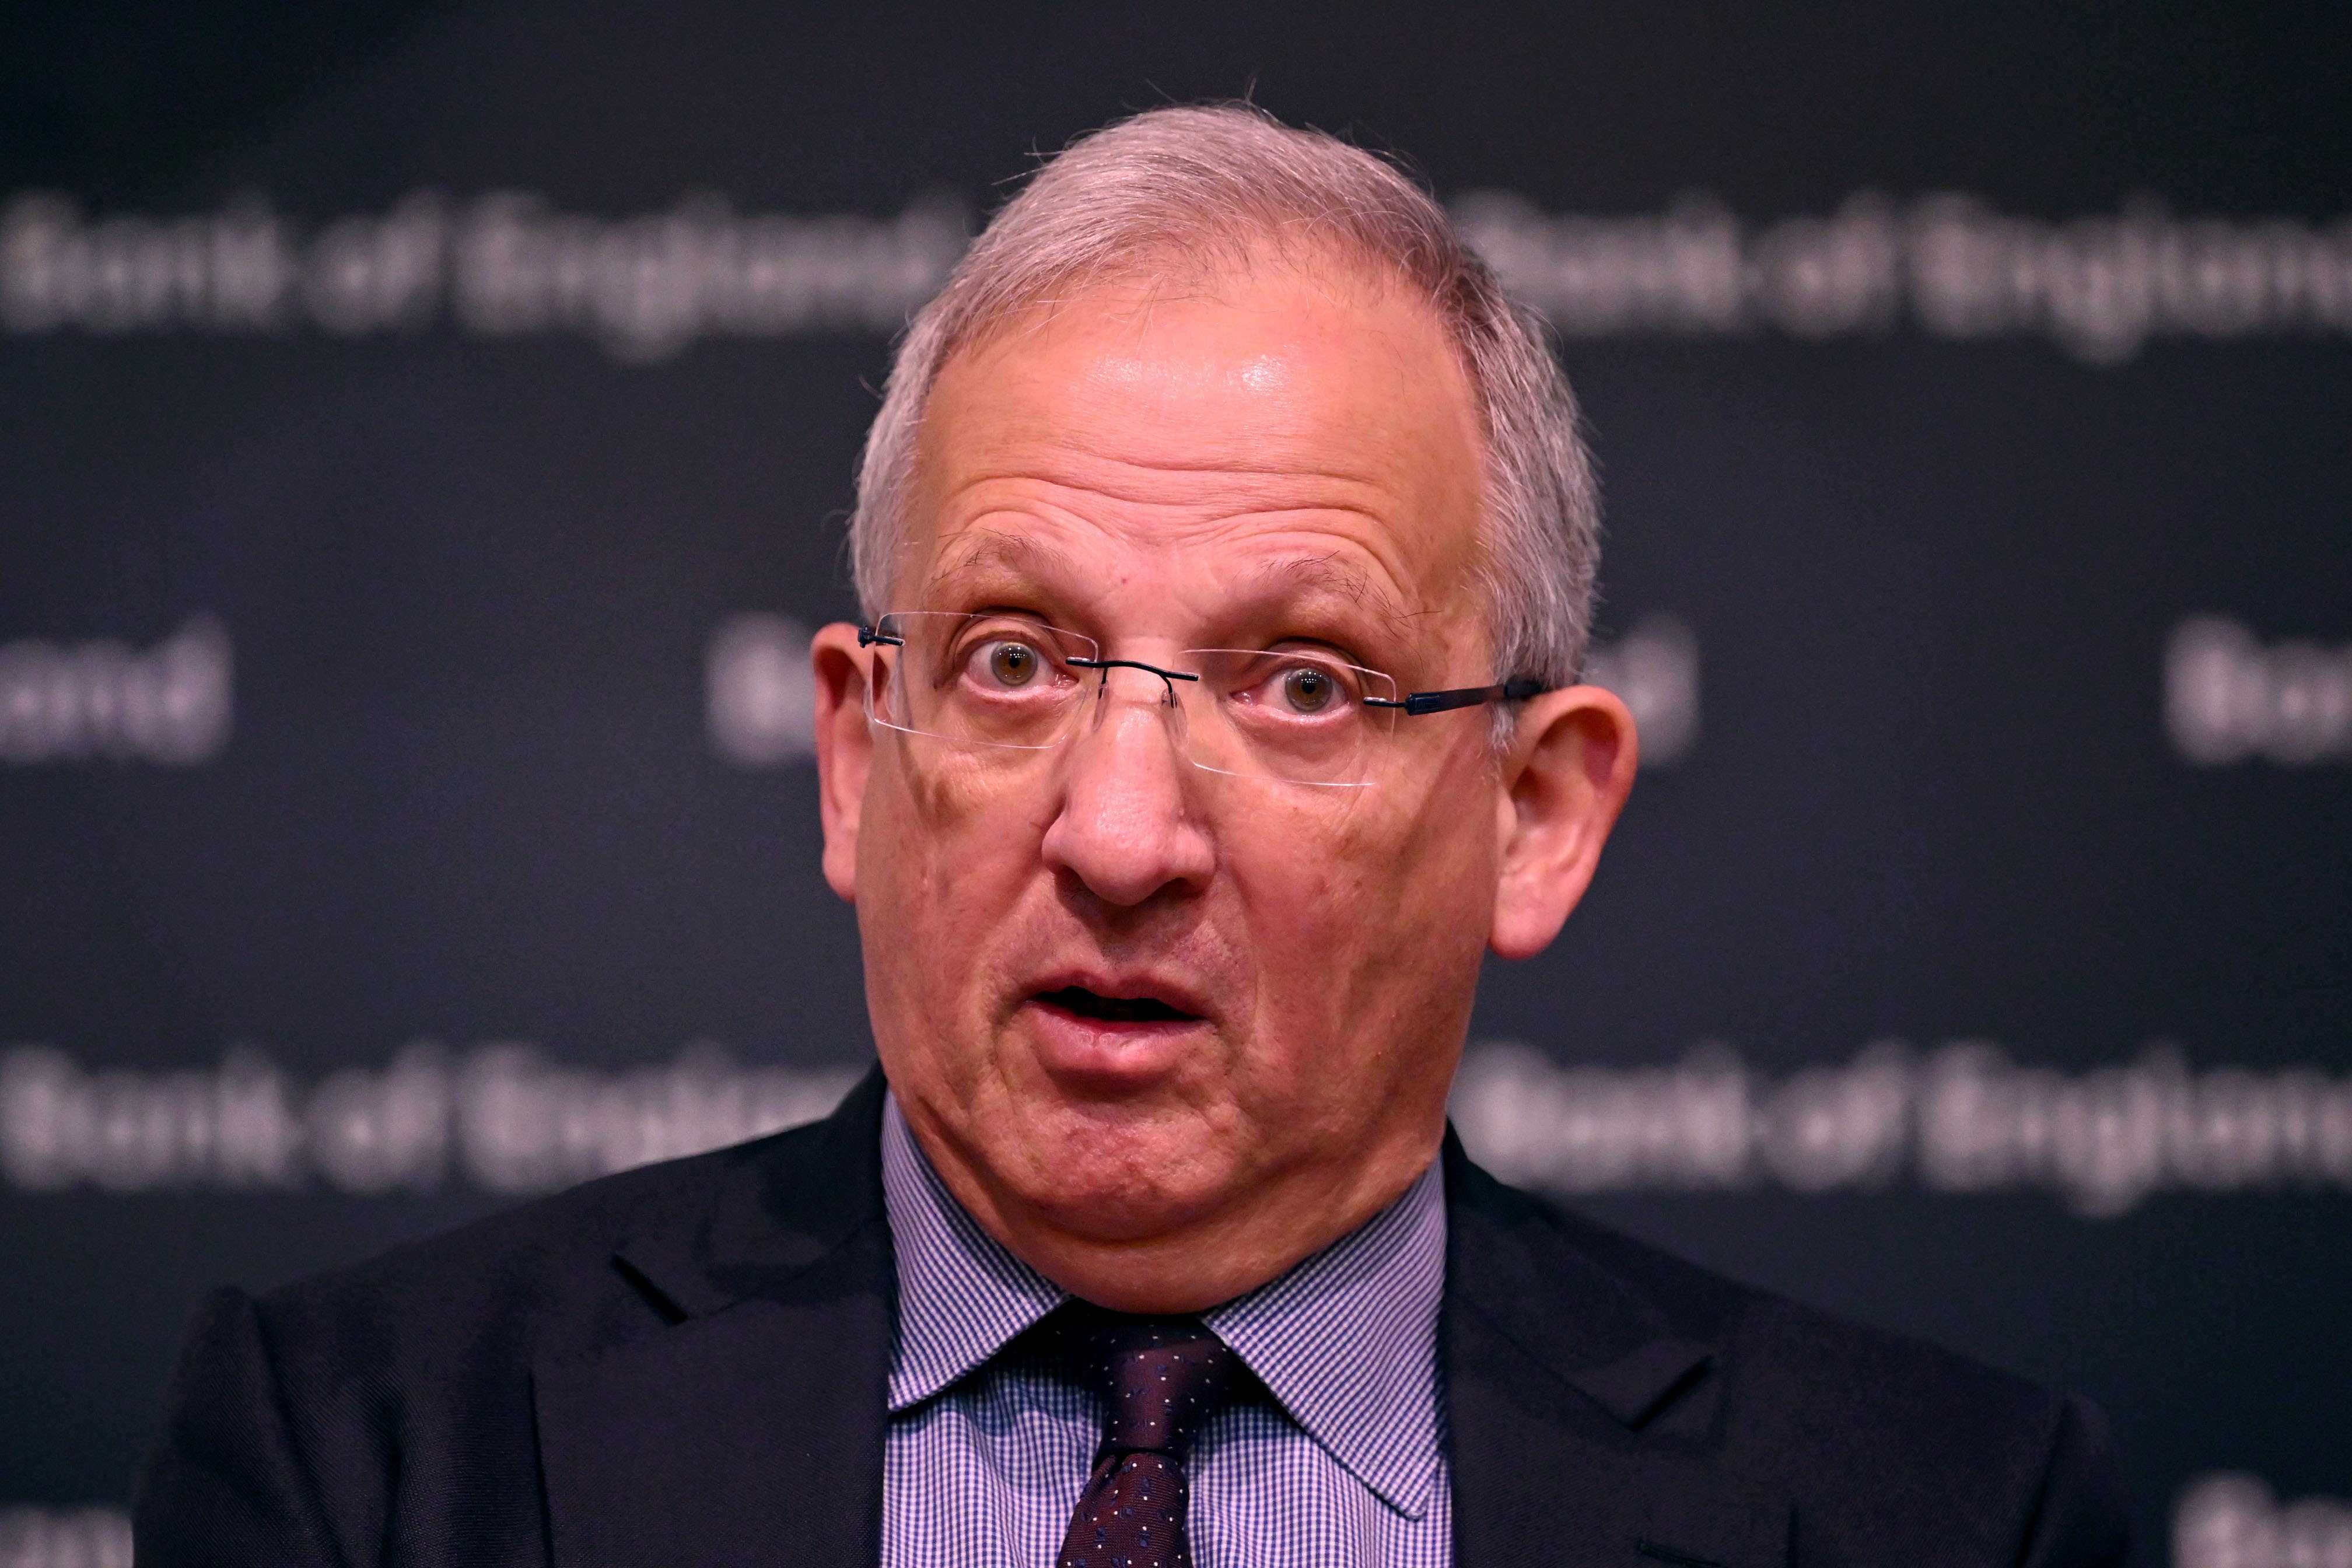 Deputy Governor Jon Cunliffe said the tests would give ‘valuable insight’. (Leon Neal/PA)